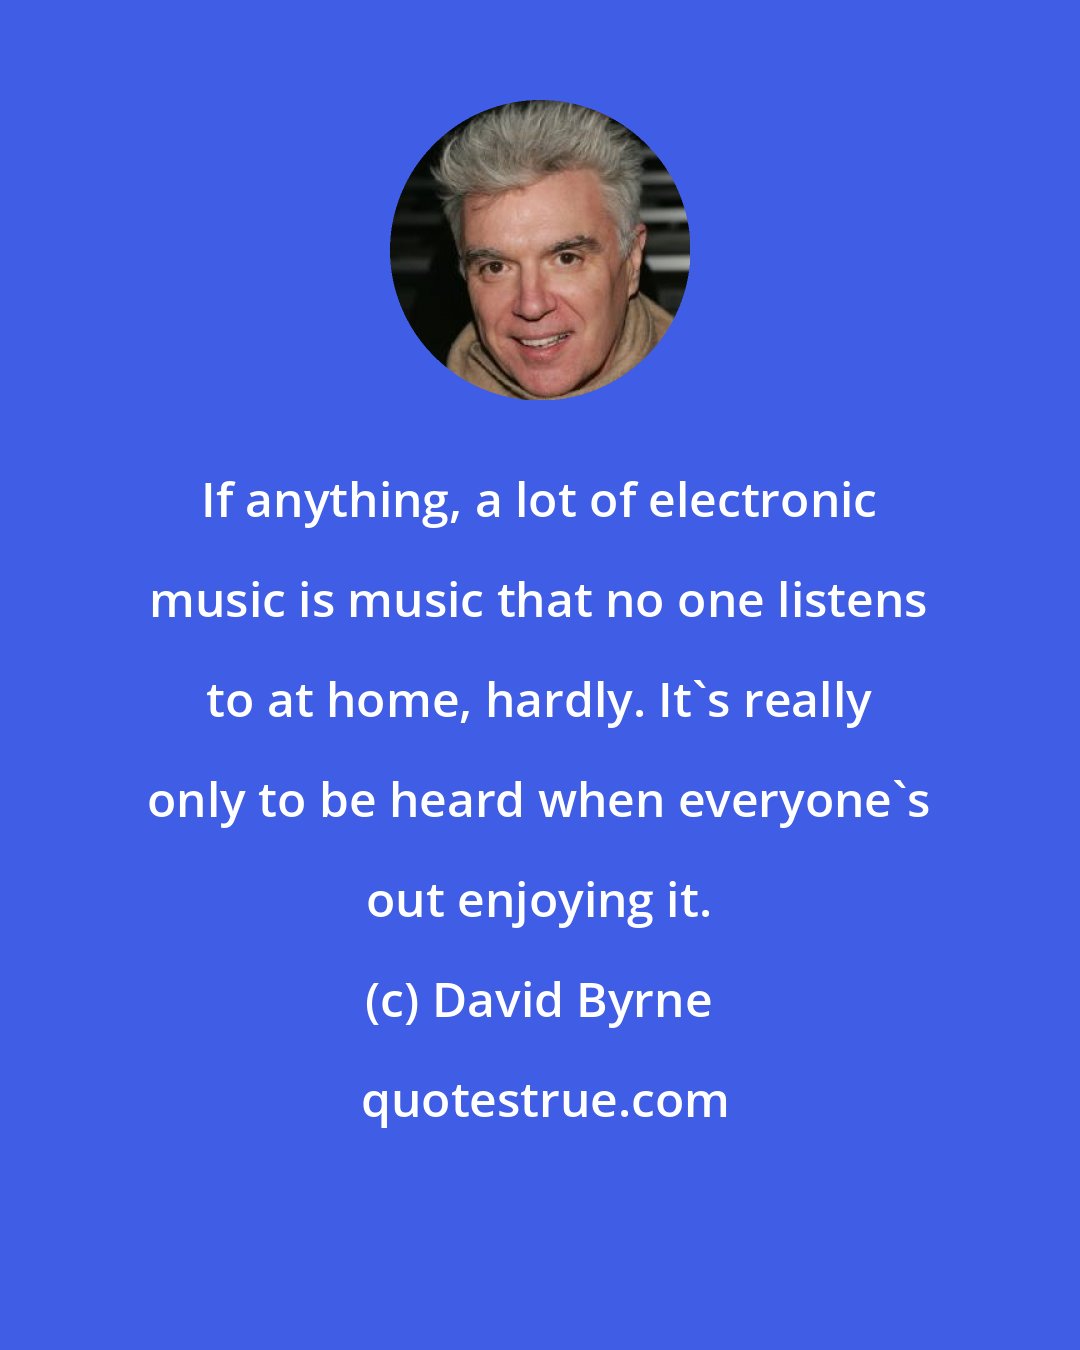 David Byrne: If anything, a lot of electronic music is music that no one listens to at home, hardly. It's really only to be heard when everyone's out enjoying it.